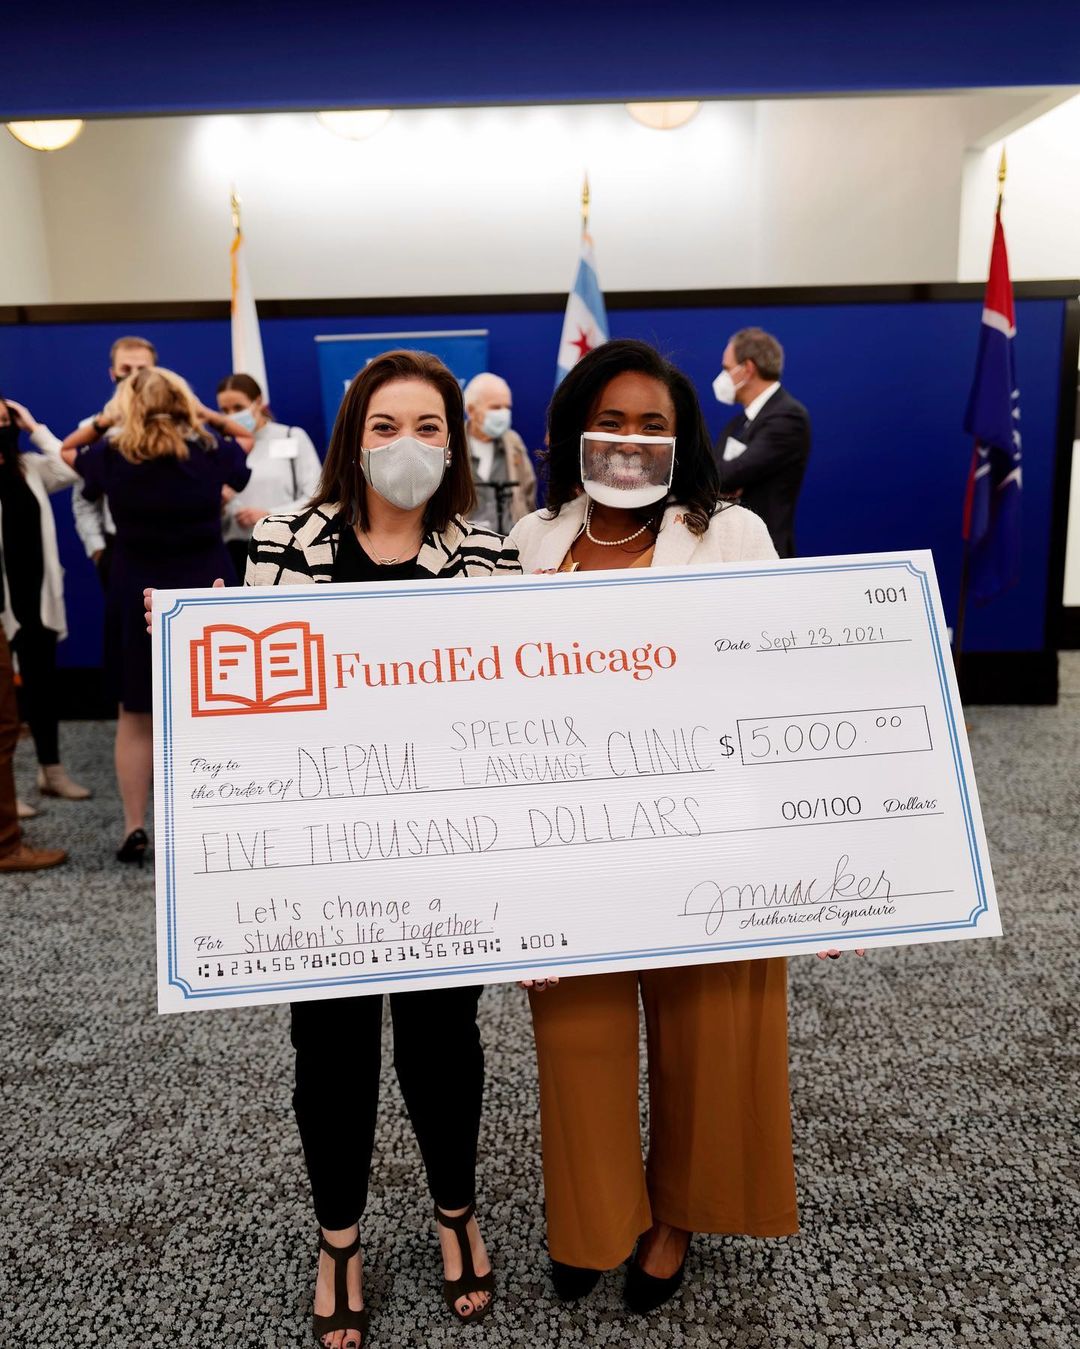 FundED Chicago